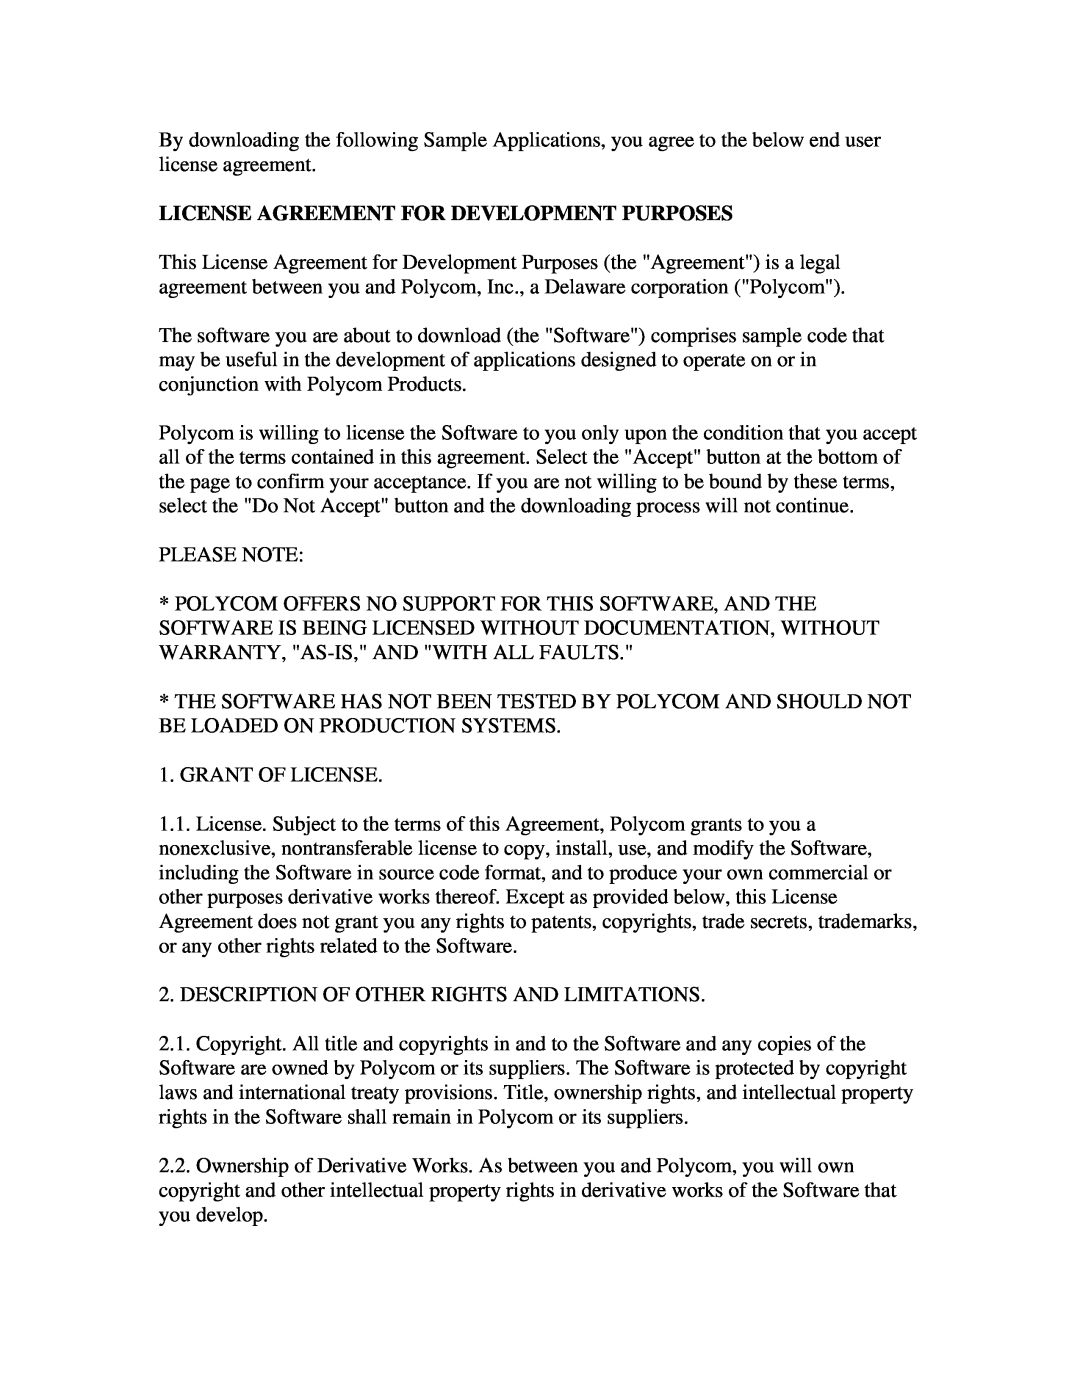 Polycom SIP 3.1 manual License Agreement For Development Purposes 